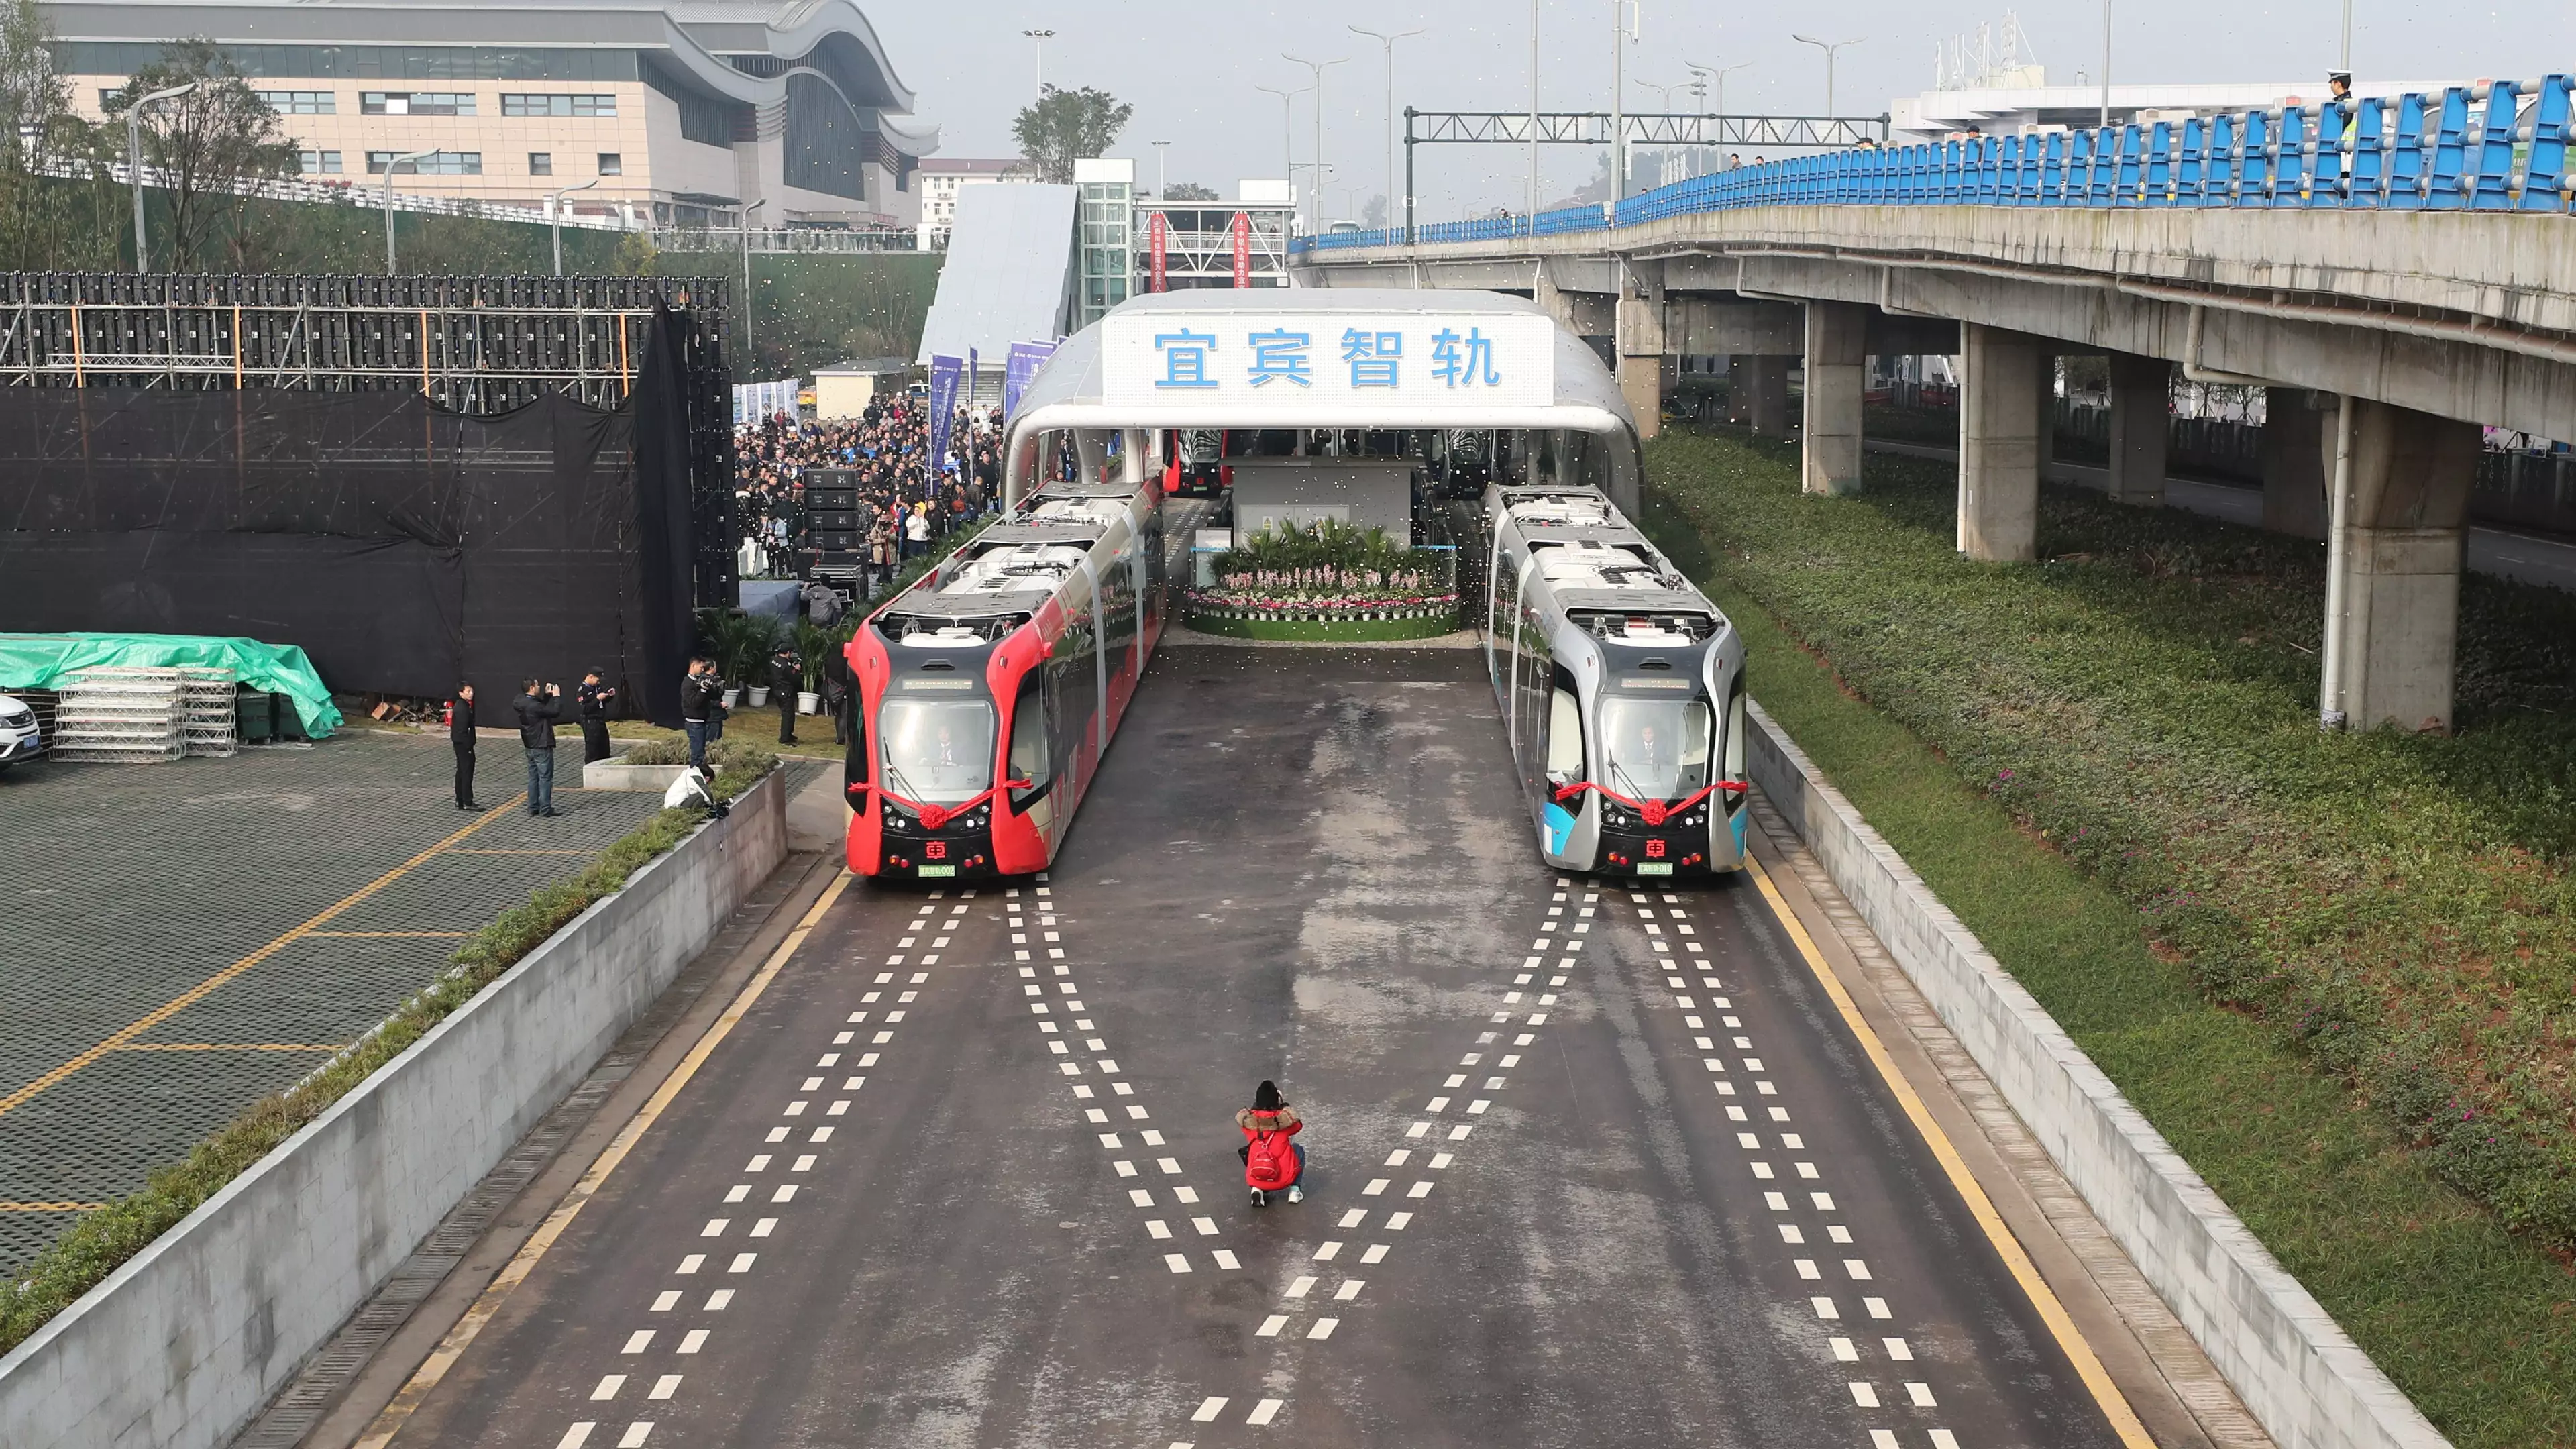 China Has Self-Driving Train That Doesn’t Use Tracks And Runs On A Virtual Rail